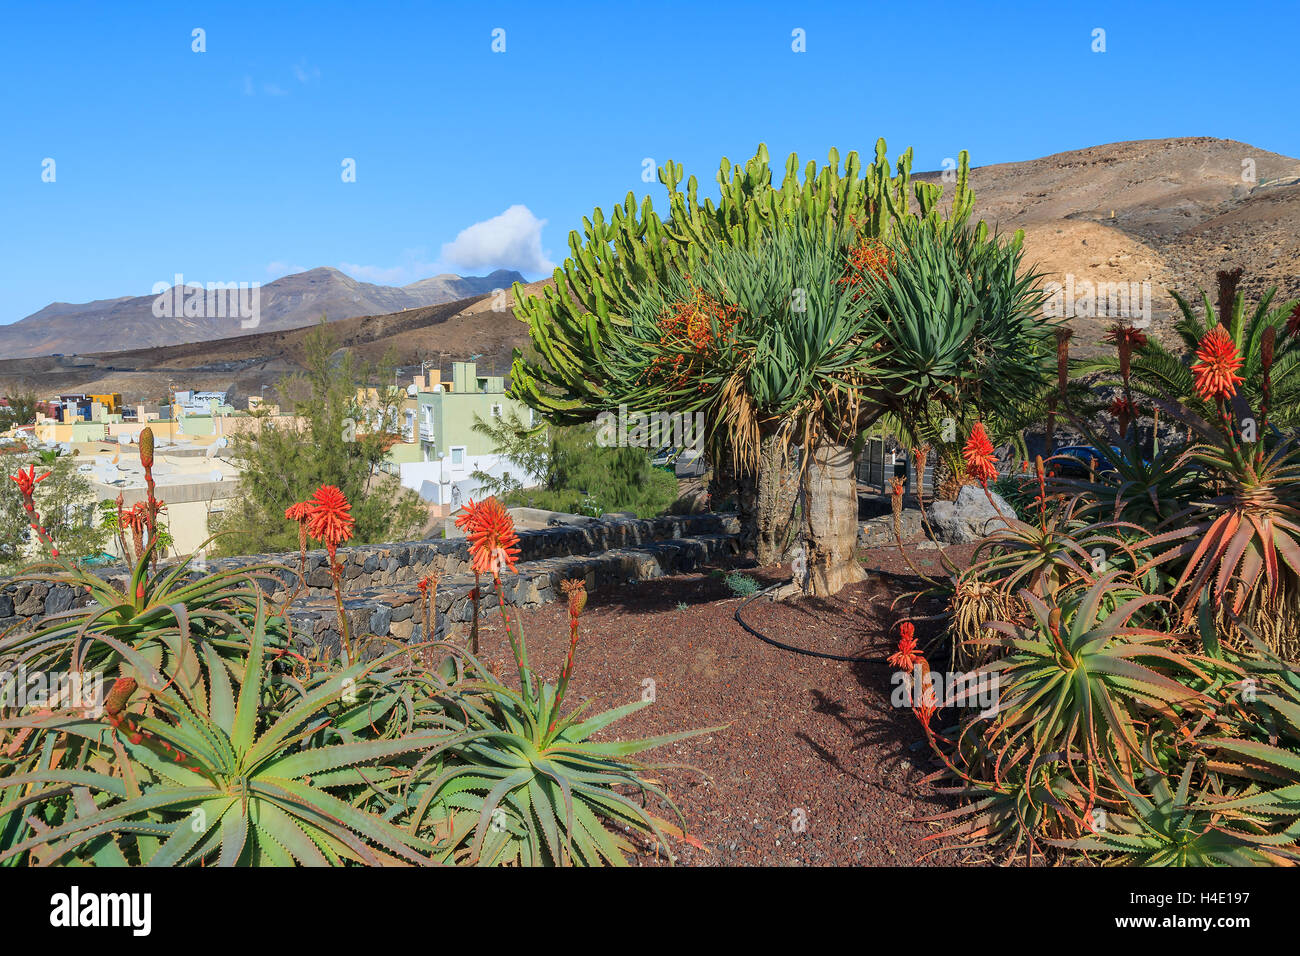 Tropical palnts in public garden in Morro Jable town, Fuerteventura, Canary Islands, Spain Stock Photo